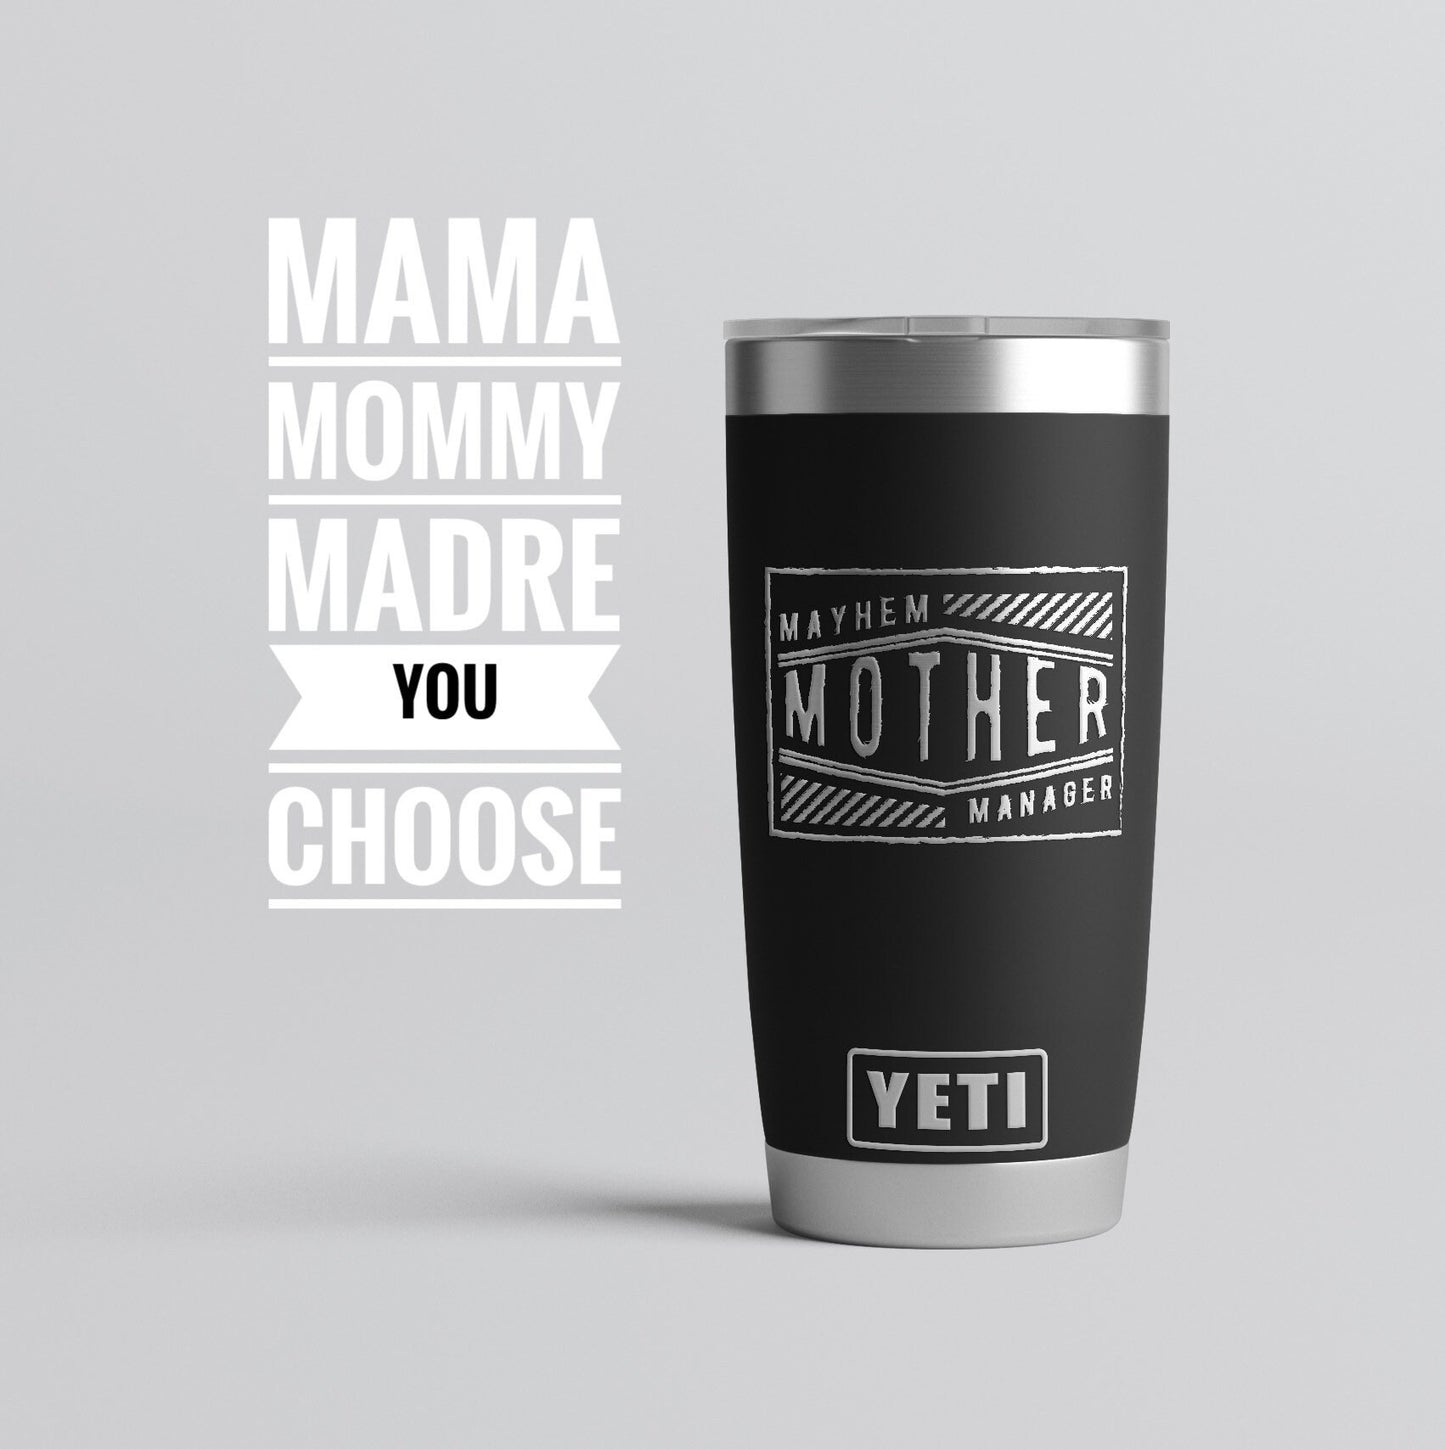 Mother's Day Gift, Personalized Yeti or Polar Camel Tumbler, Mom  Established, New Mom Gift, Personalized Gift, 